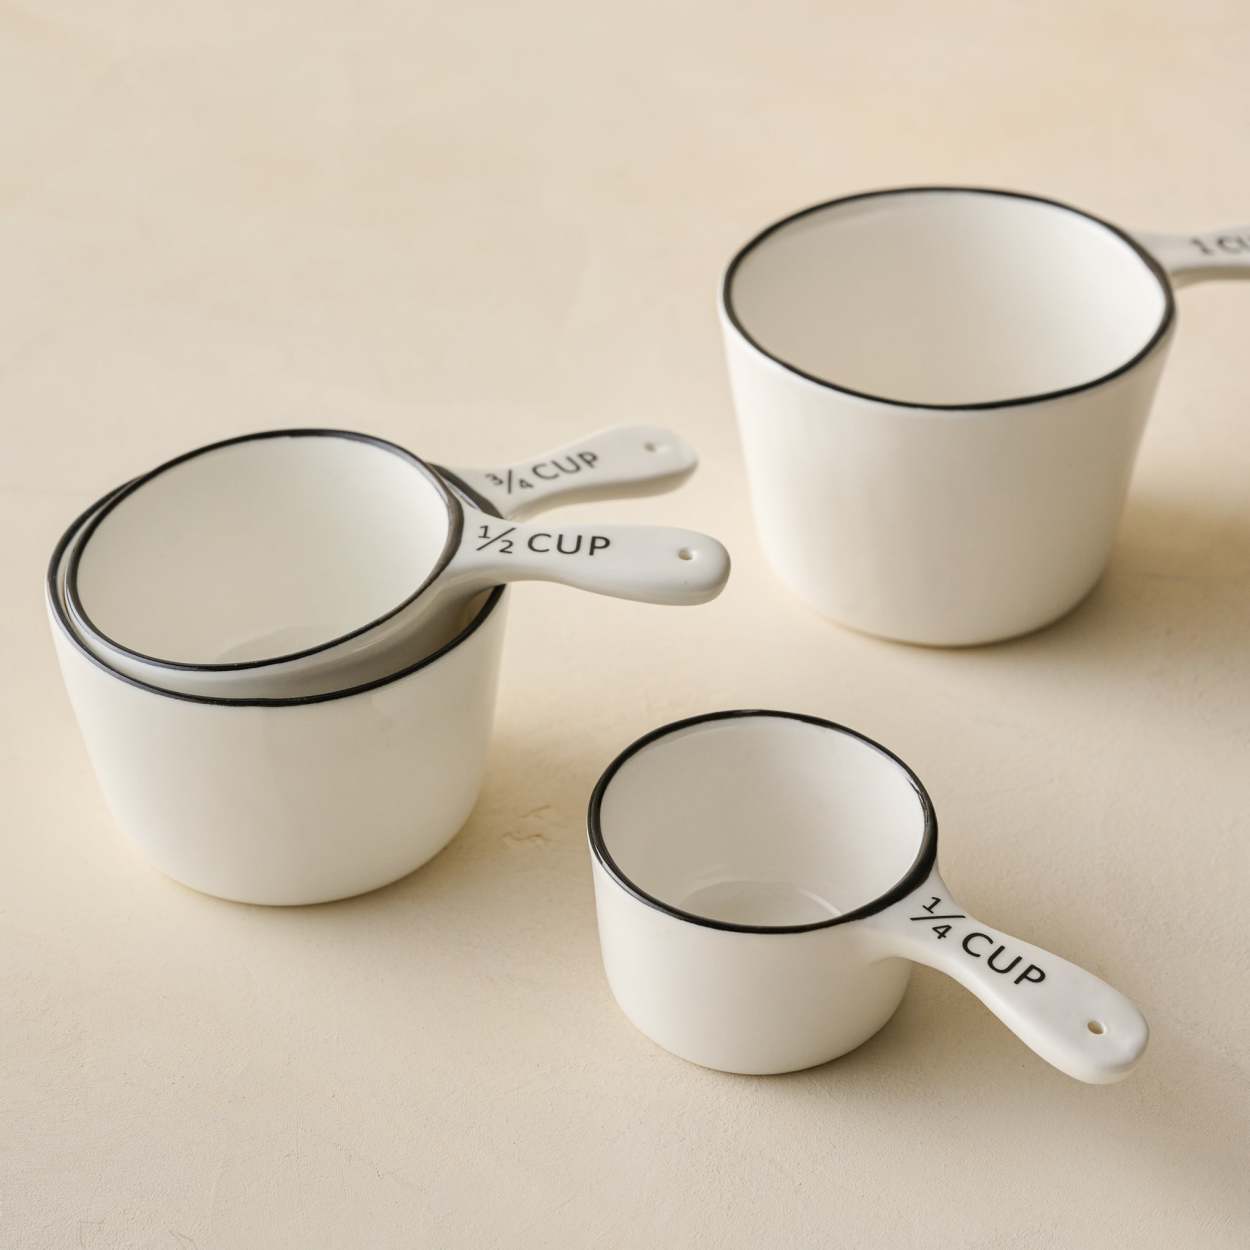  Ceramic Measuring Cup Set of 4 with Handle for Baking